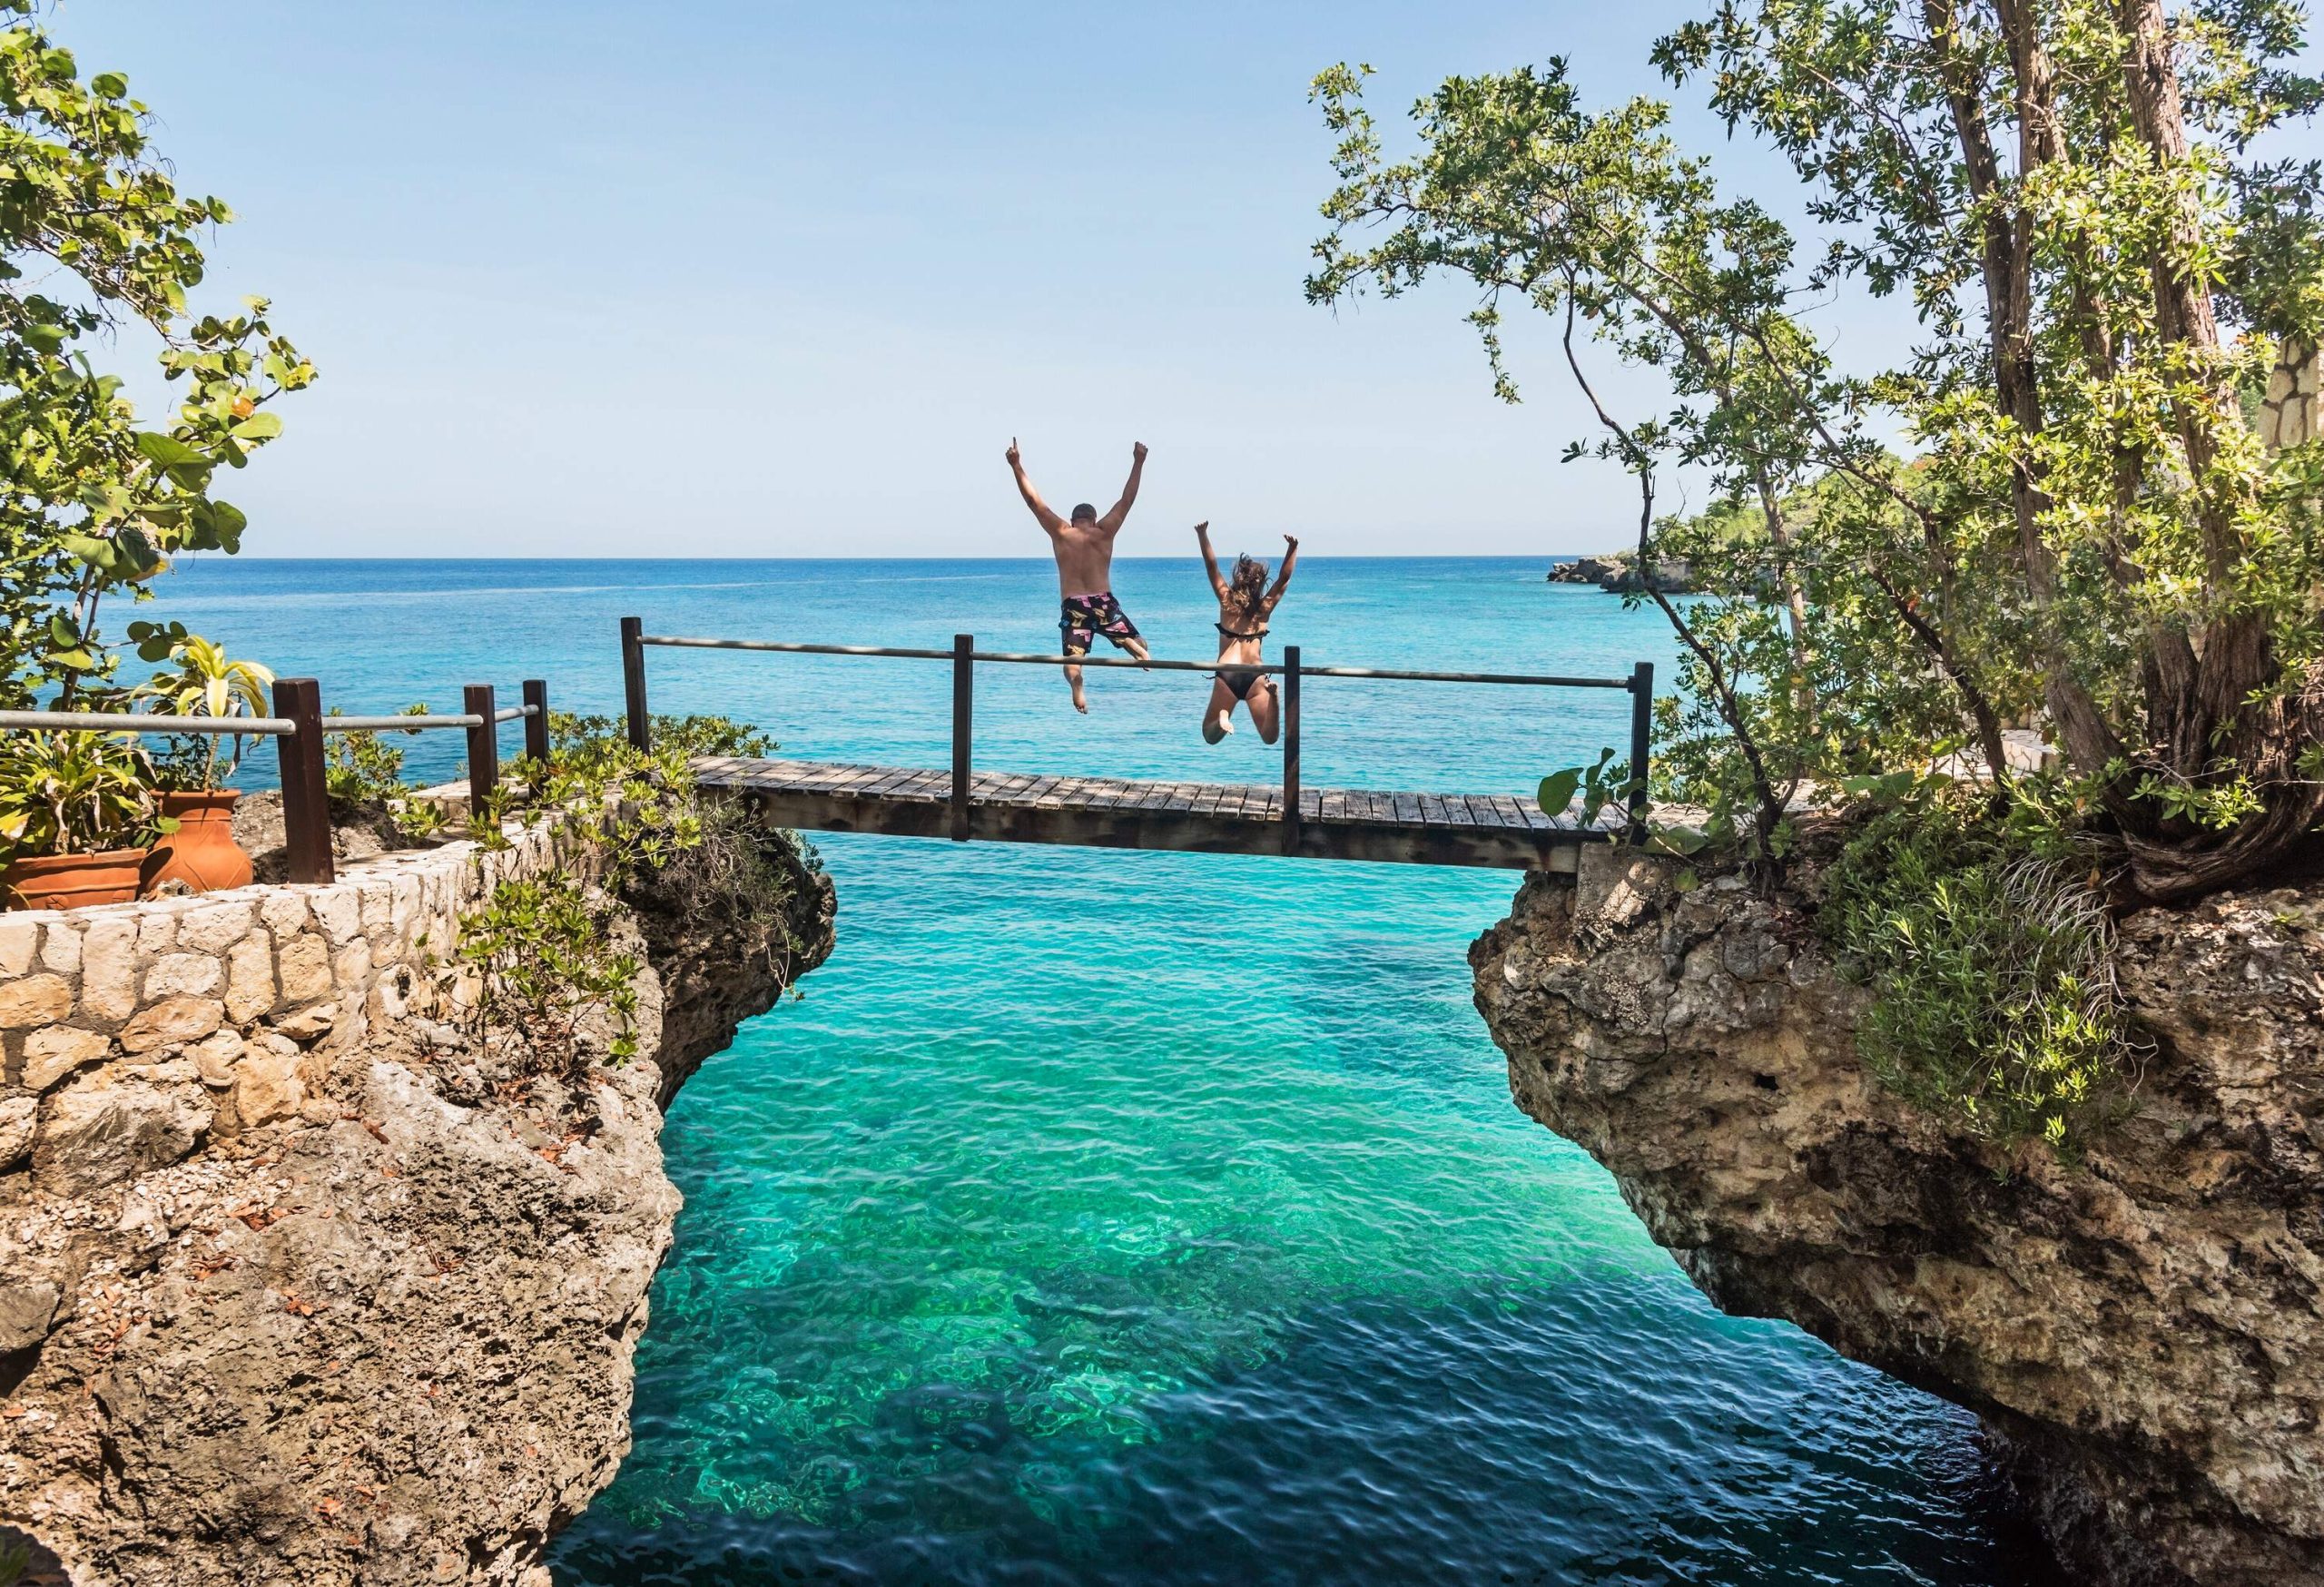 Two people jumping off a short bridge into the turquoise ocean.